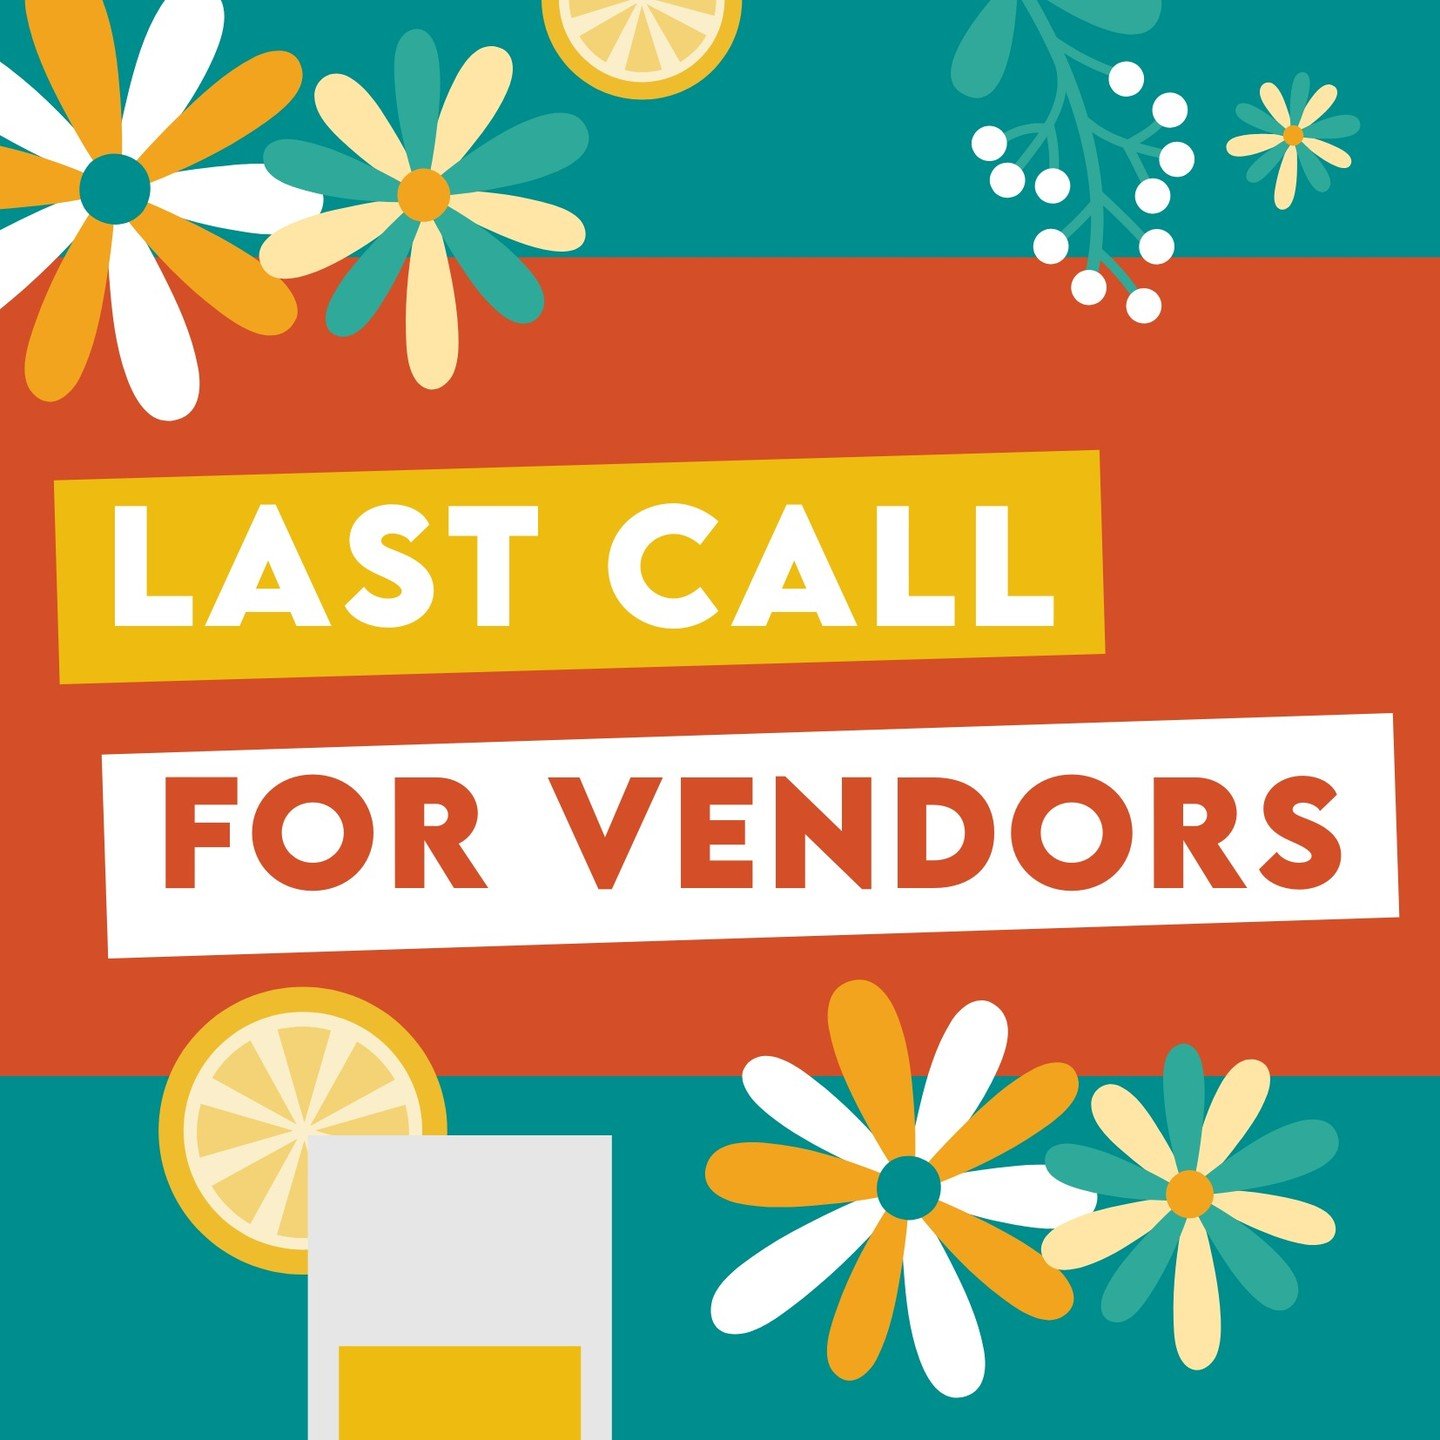 LAST CALL FOR VENDORS! We need YOUR help to make our Downtown Rutland Sip &amp; Shop a sipping success! We have limited vendor space remaining for our upcoming event on Thursday, May 16th, from 5-8 pm!

The Downtown Rutland Partnership invites Vermon